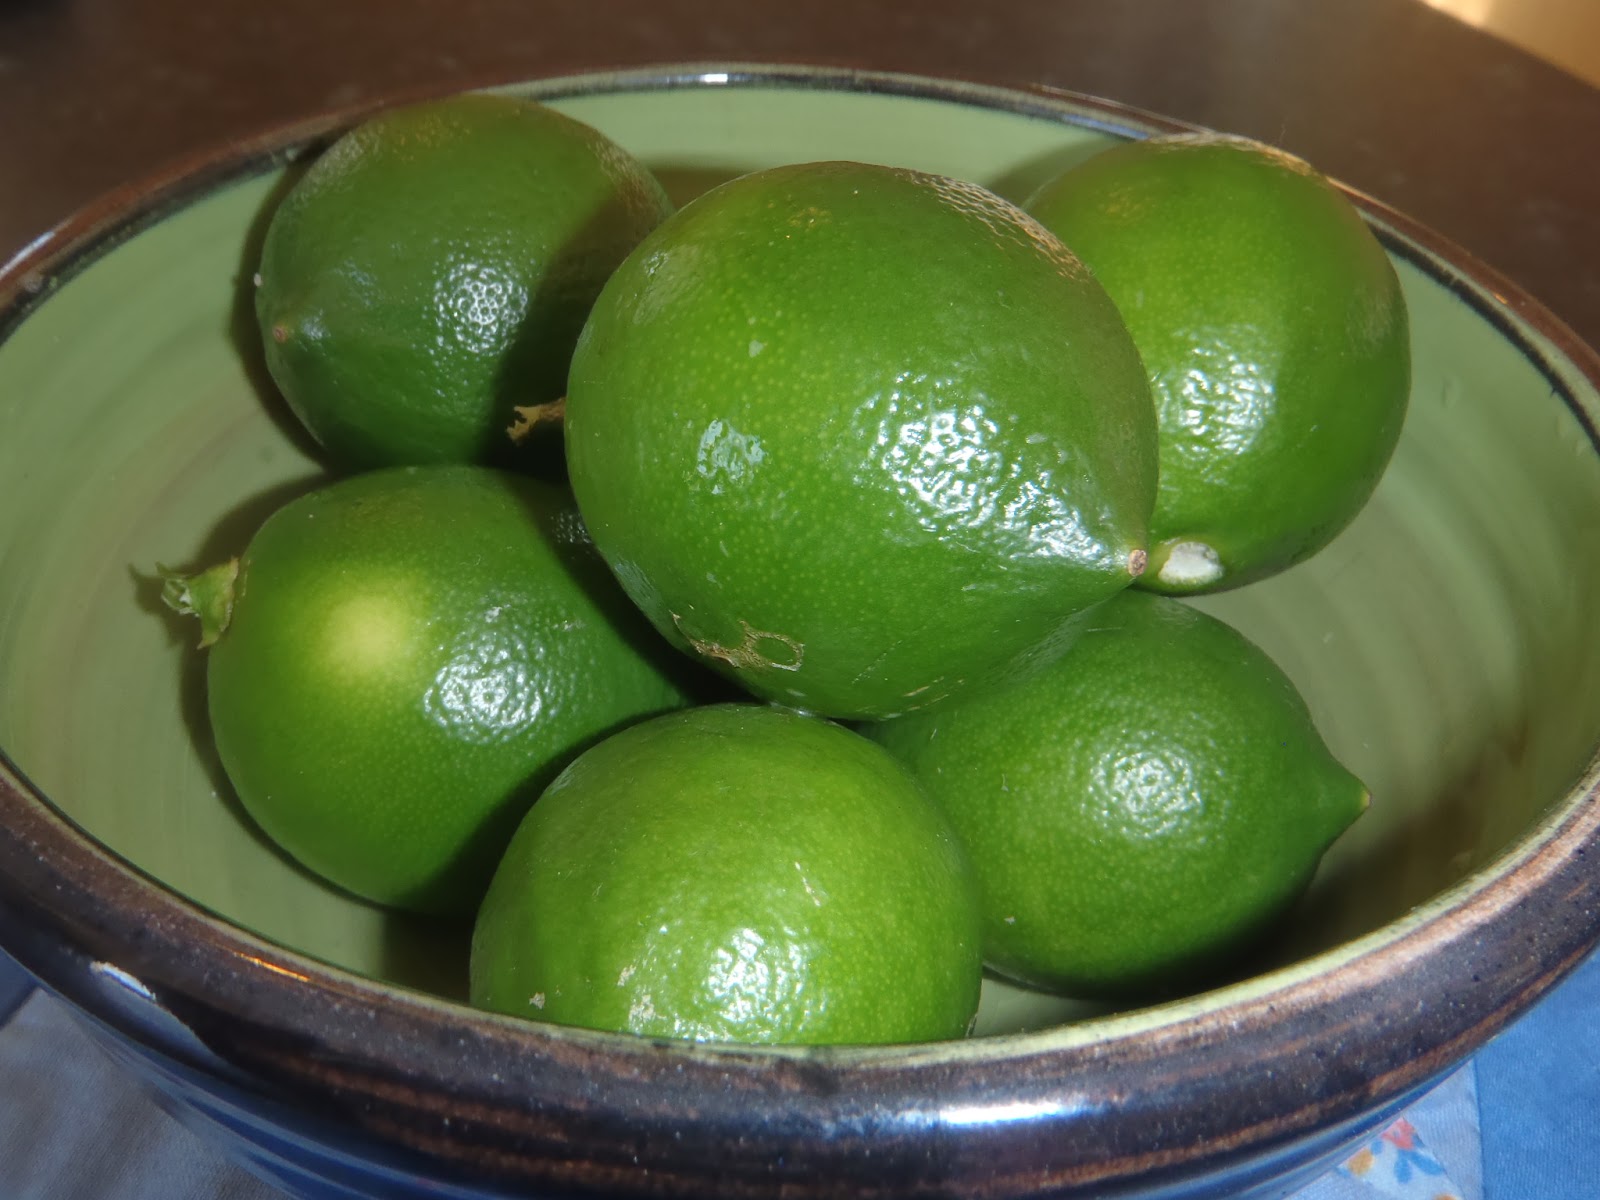 Where The Woollen Things Are: When Life Gives You Green Lemons...